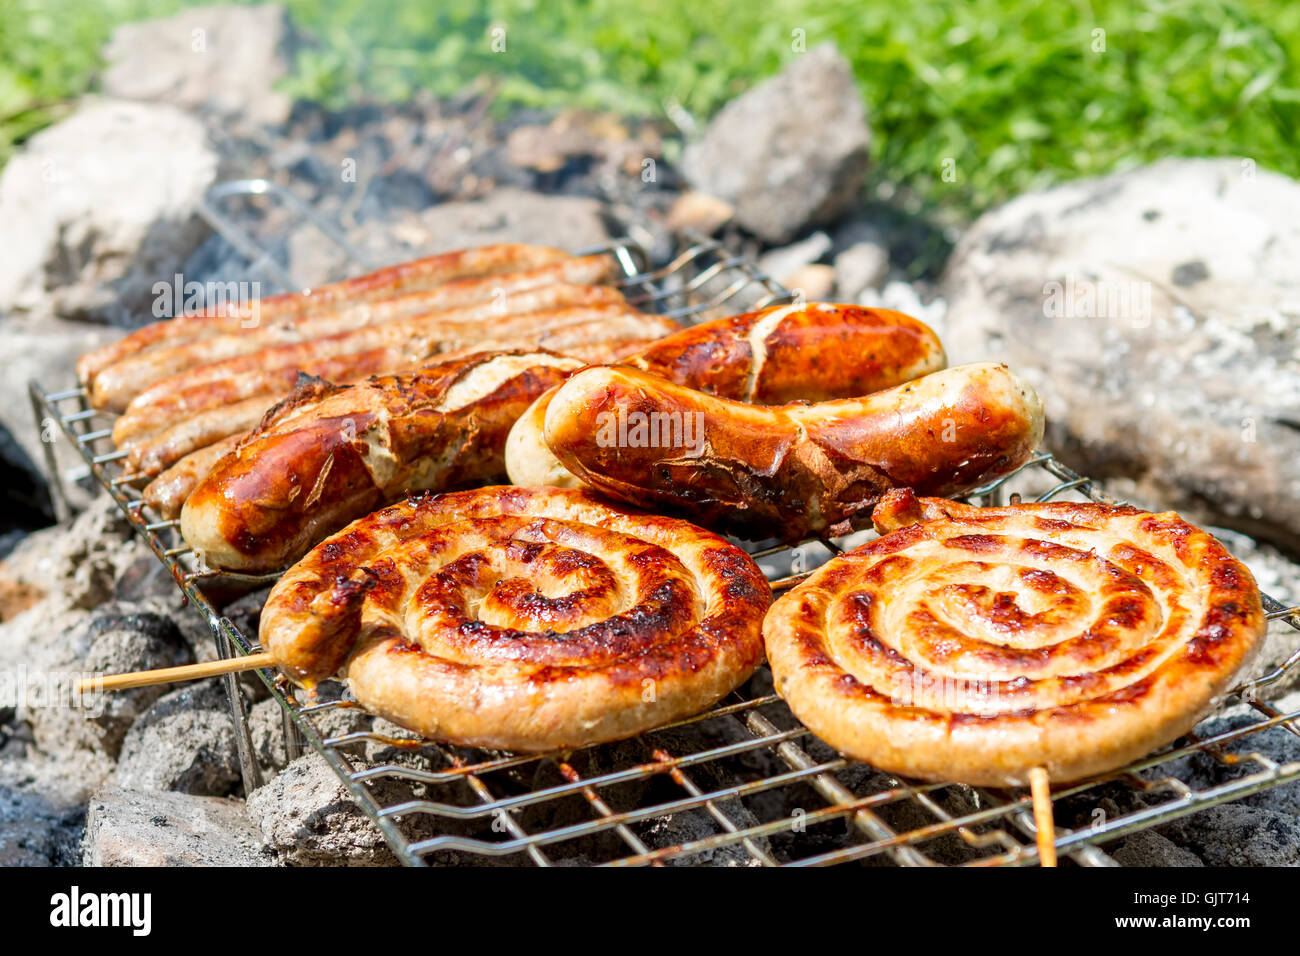 Grilling bratwursts on a charcoal grill Stock Photo